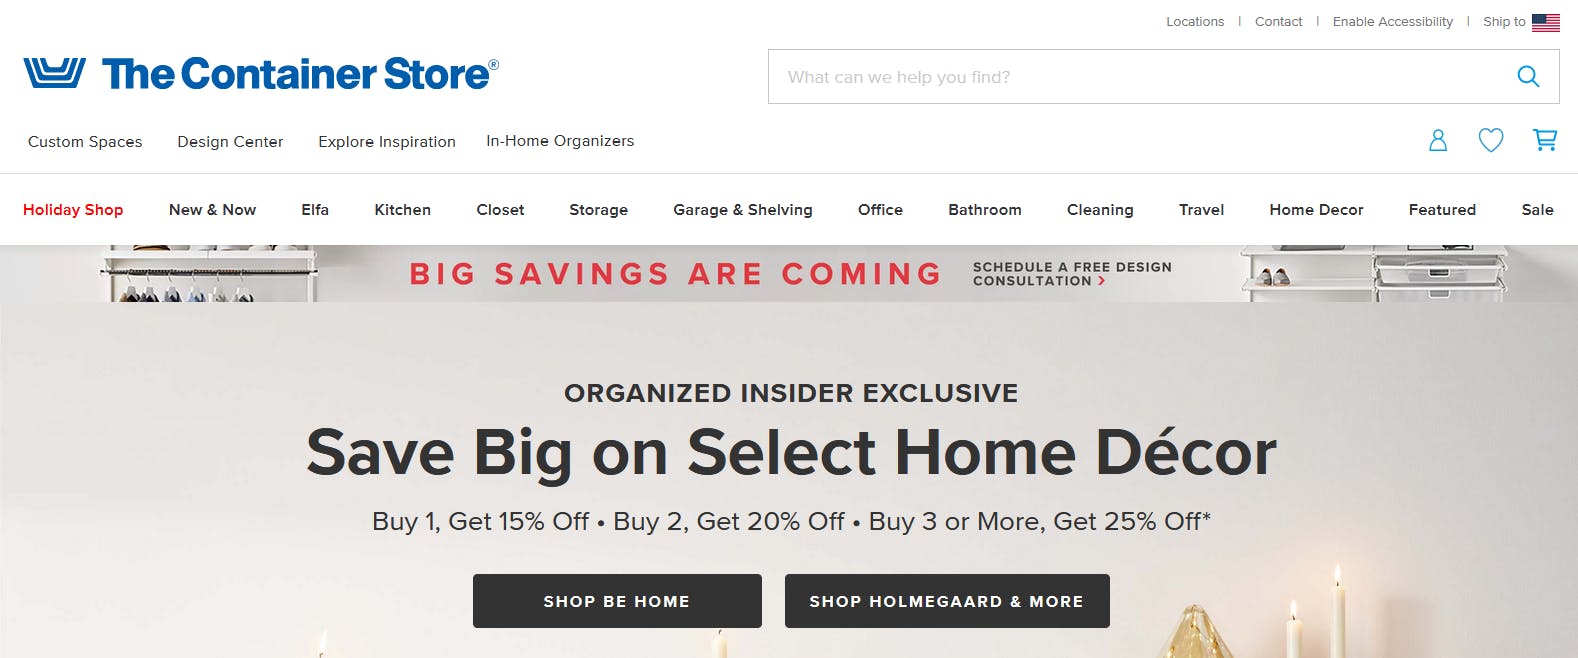 An image of the Container Store website.